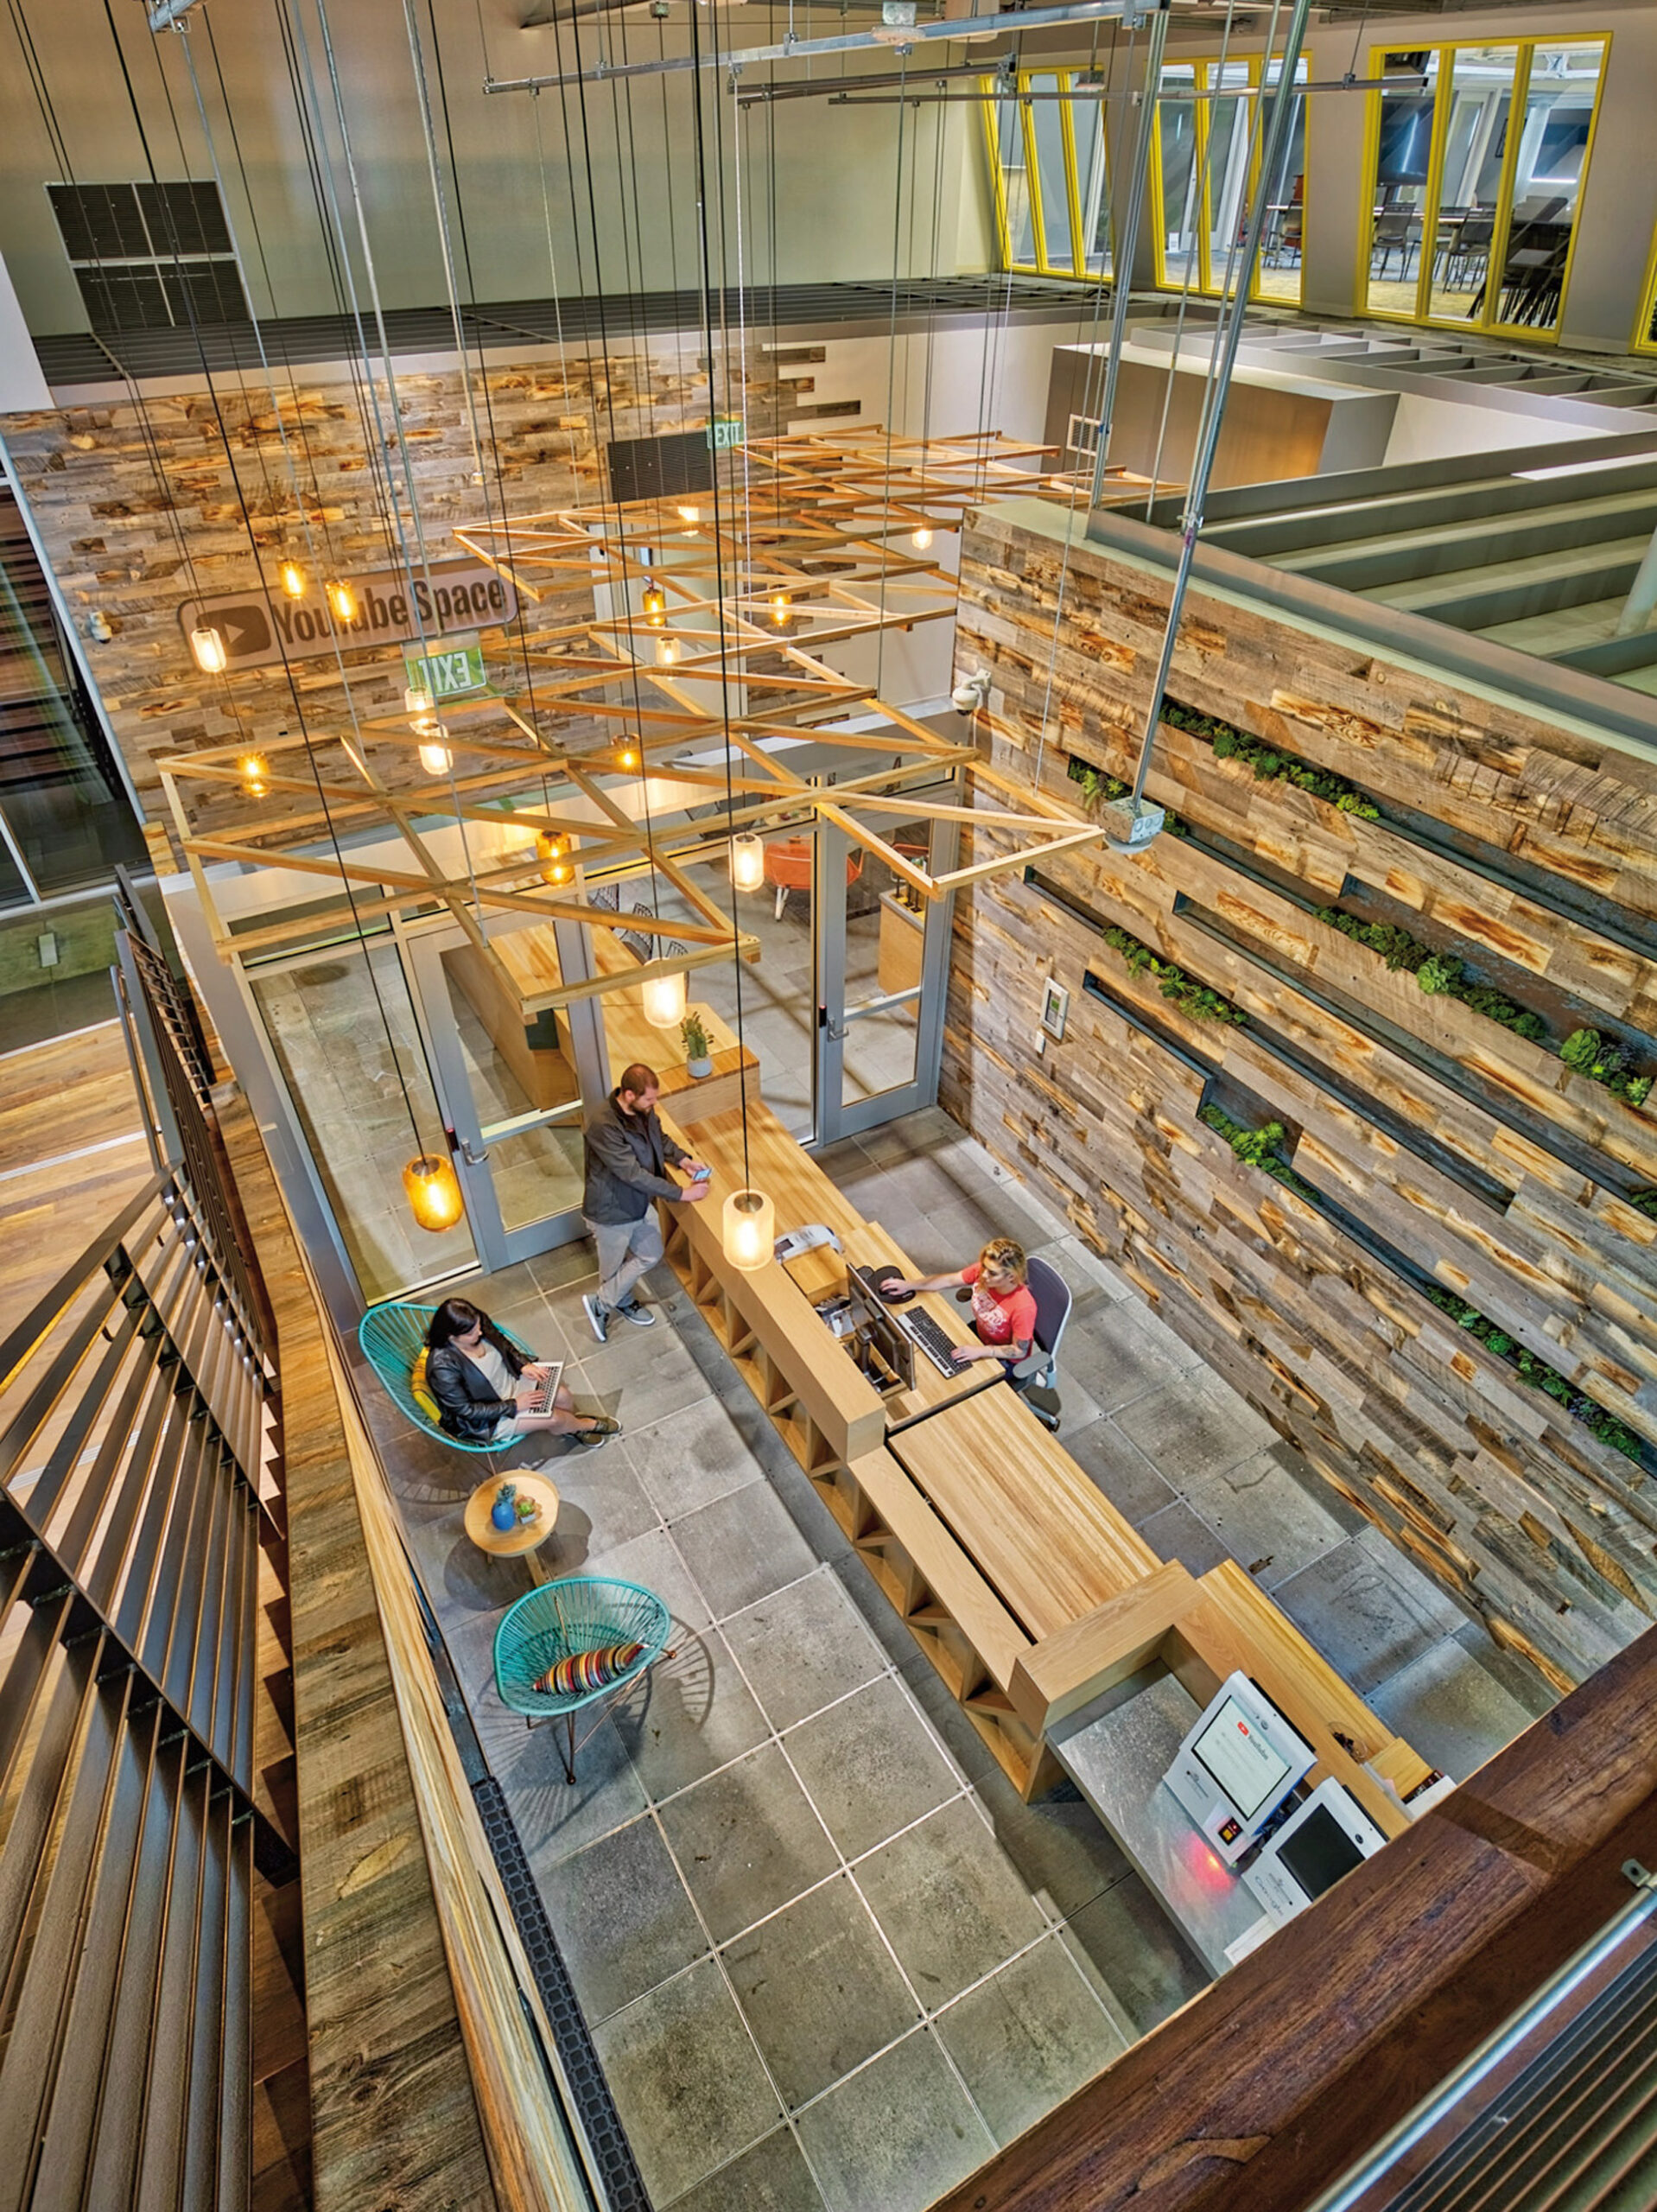 This modern atrium features an eclectic mix of industrial and natural design elements. Exposed steel beams support a network of suspended light fixtures, contributing to the loftiness of the space. Wood cladding, interspersed with greenery, creates a textured backdrop along one wall, while a terraced section offers informal seating. Polished concrete floors anchor the airy scheme, and furniture pieces with clean lines provide